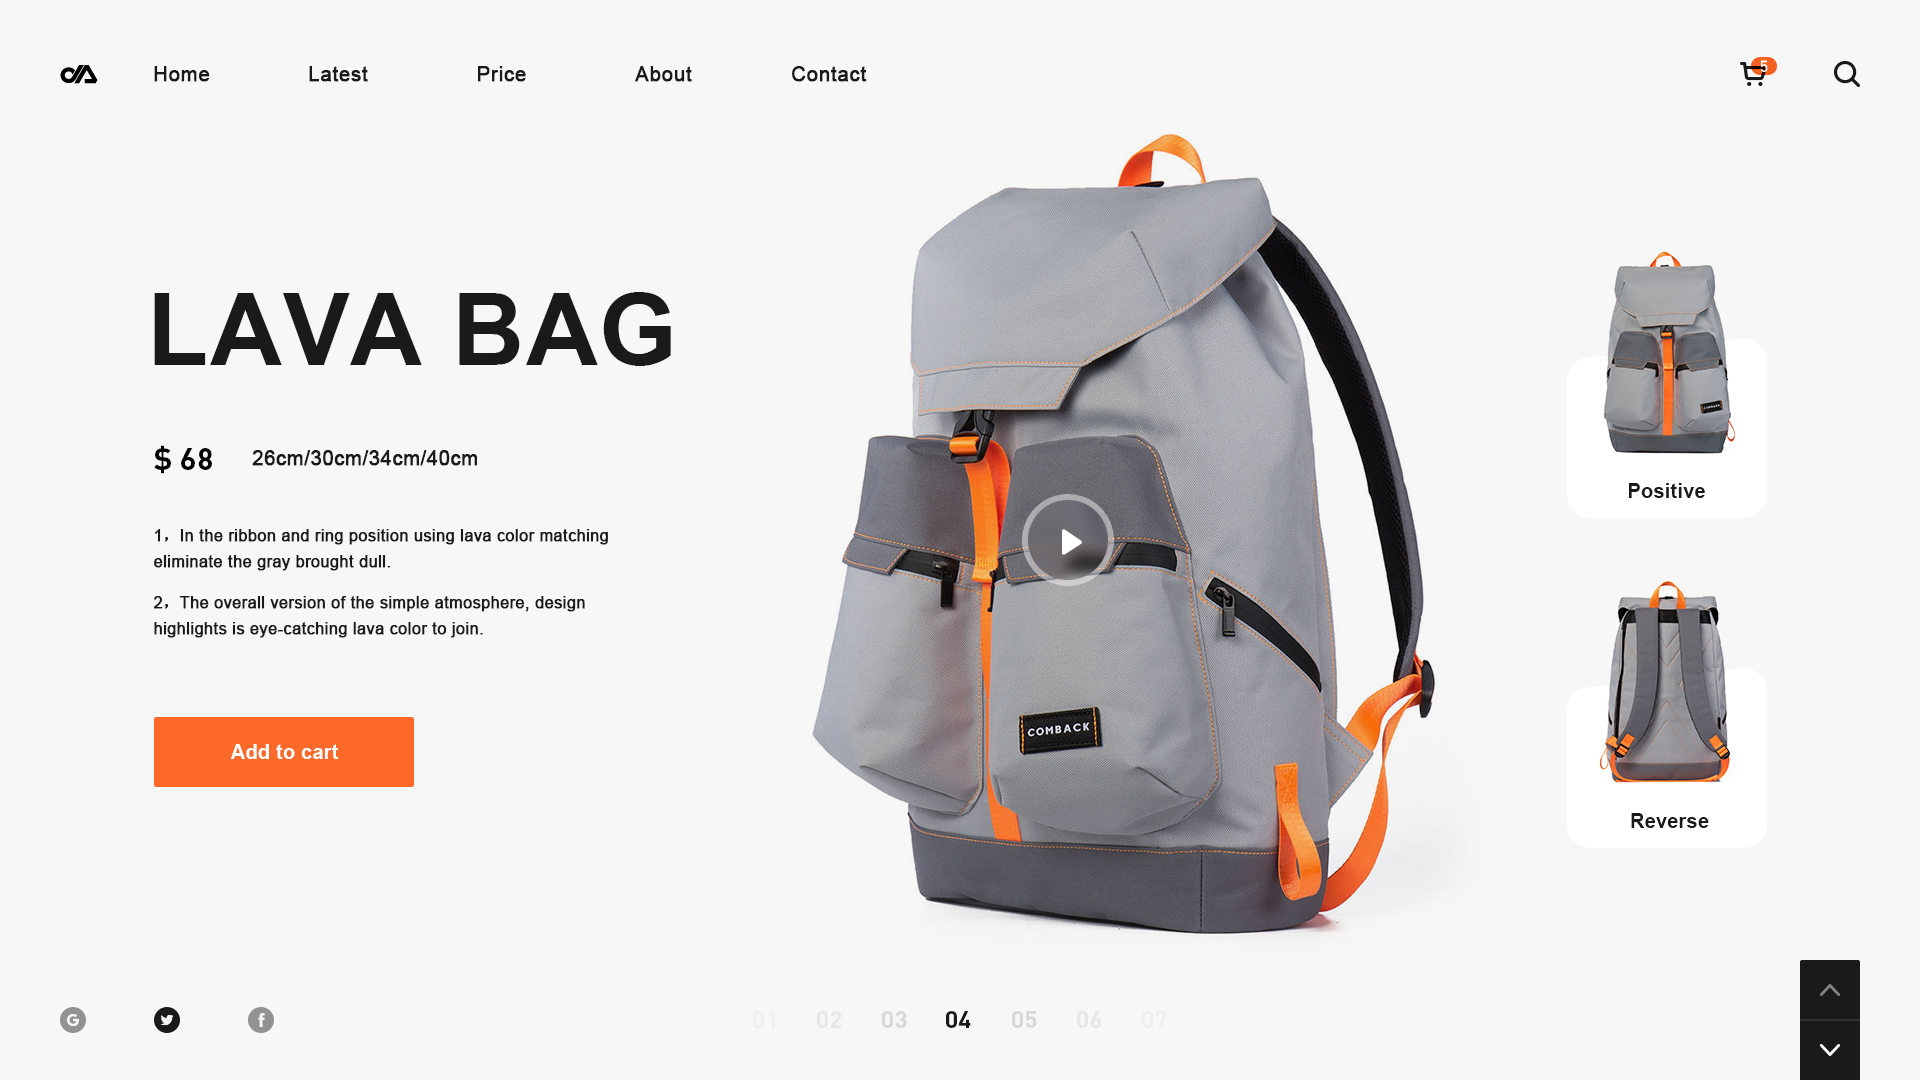 COMBACK by 是北瓜呀 for BestDream on Dribbble